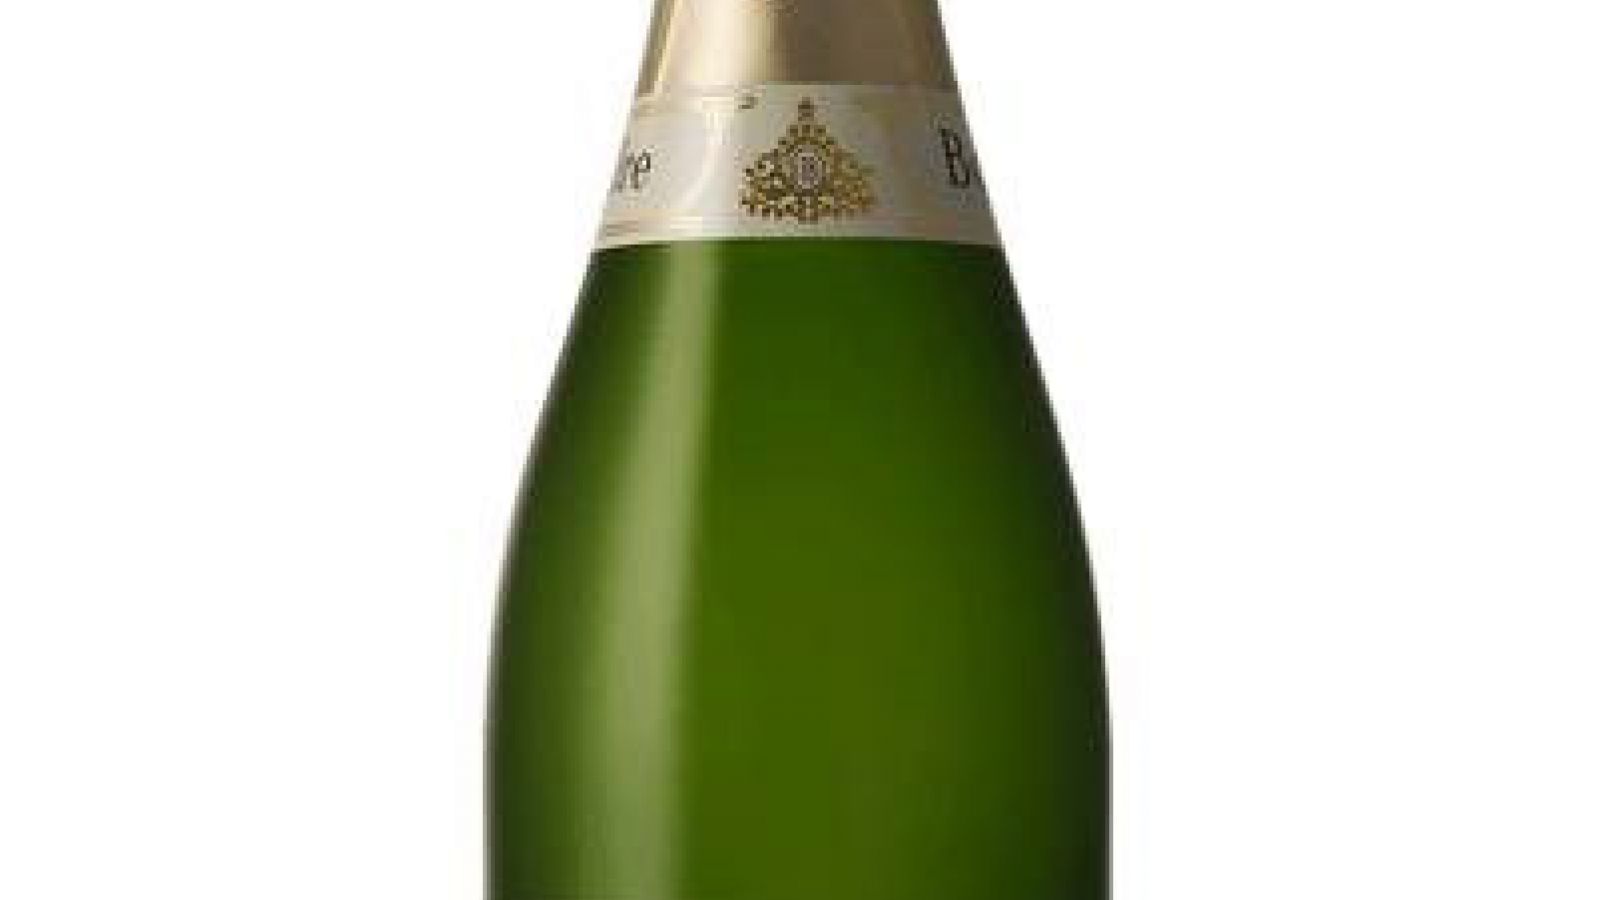 Rosè Dom Pérignon Champagne AOC find best price and buy online at 385€